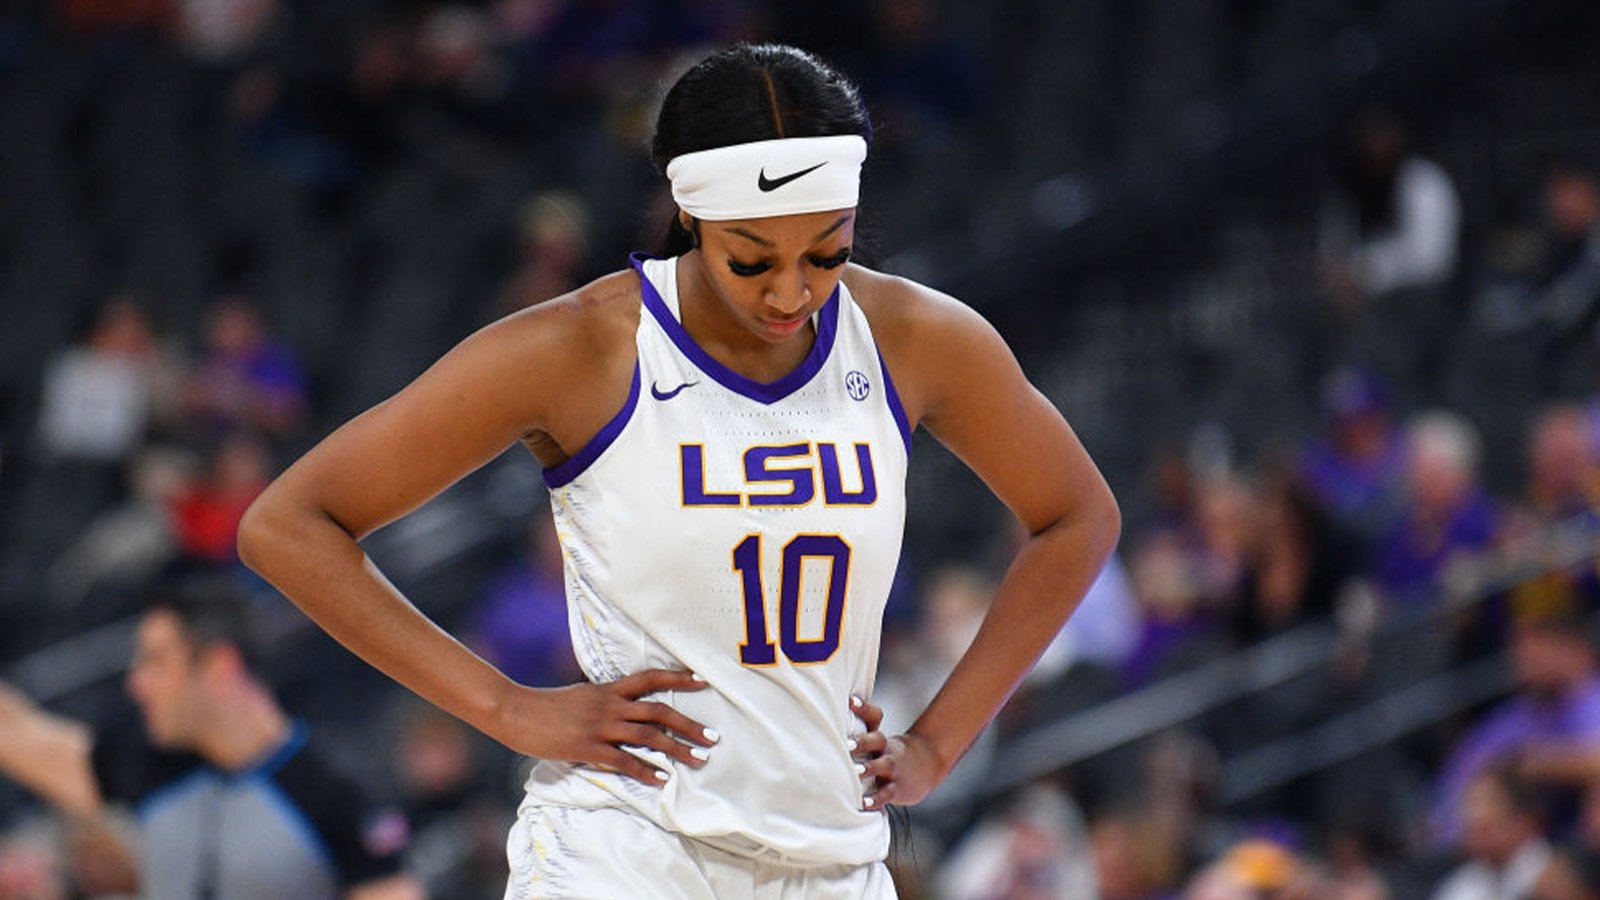 Angel Reese Issues Warning To Haters Amid Speculation About Major Drama At LSU